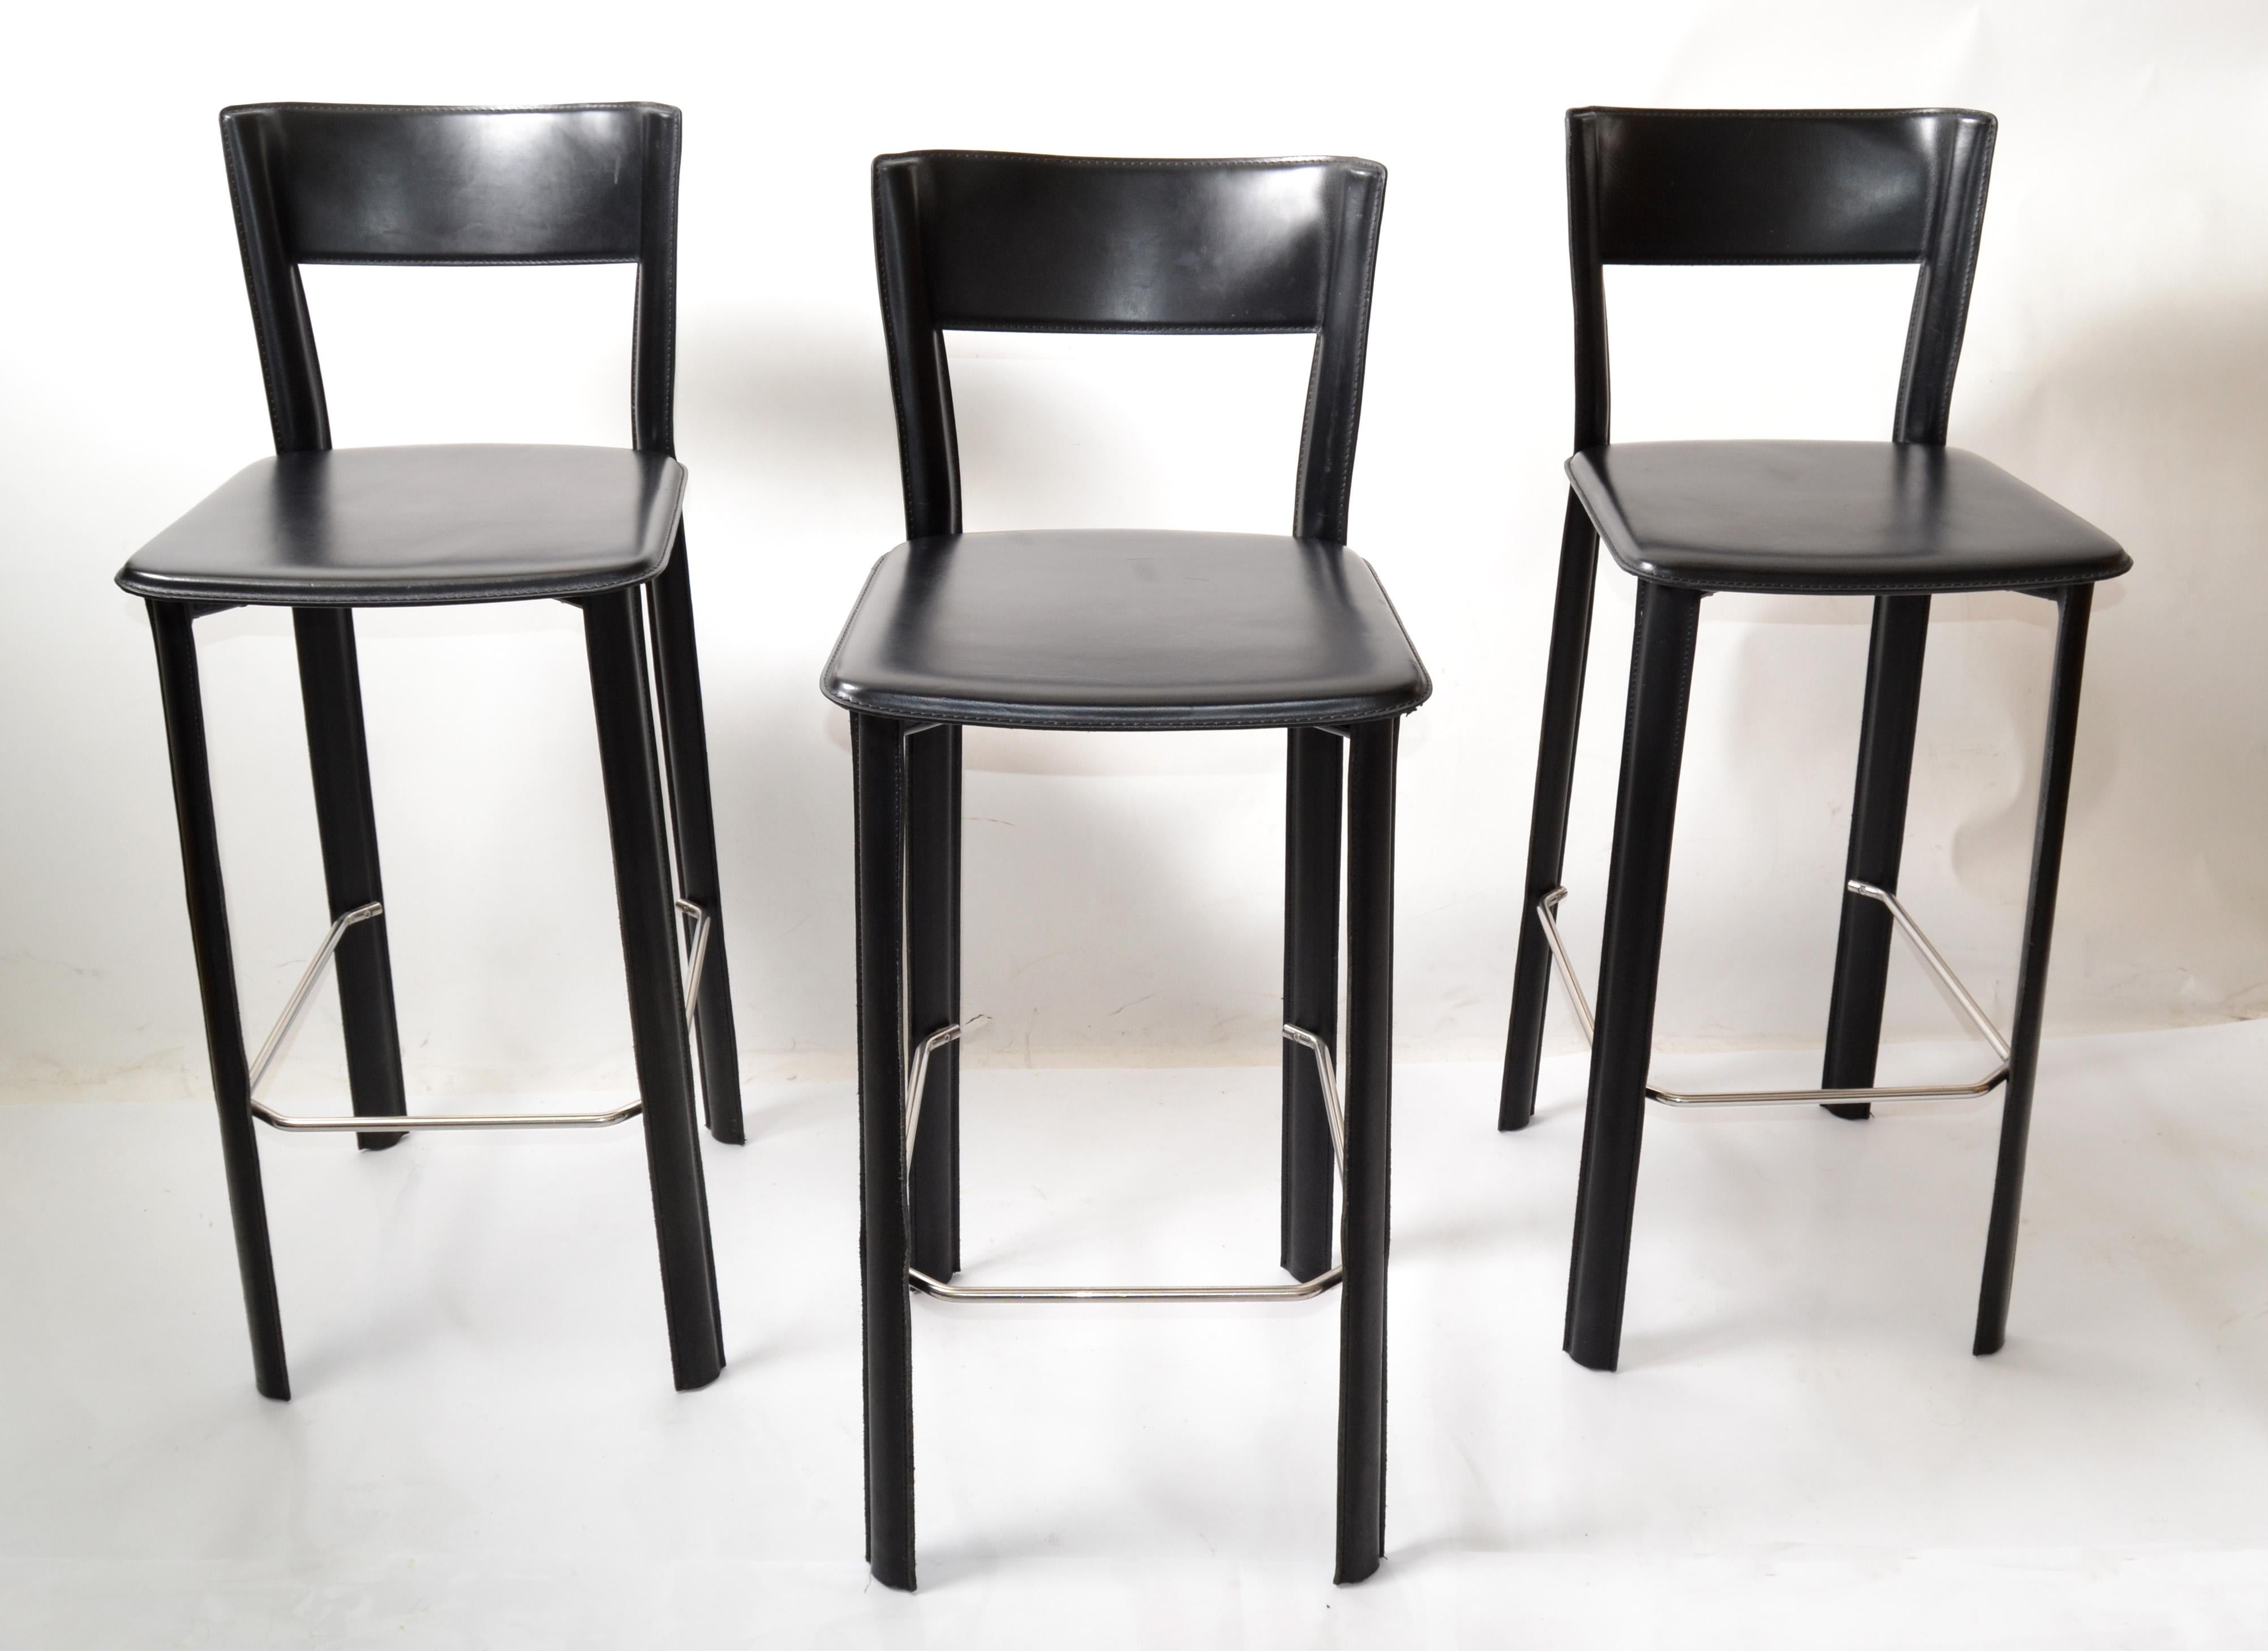 Hand-Crafted Set of 3 Italian Hand Stitched Frag Black Leather Chrome Bar Stools Contemporary